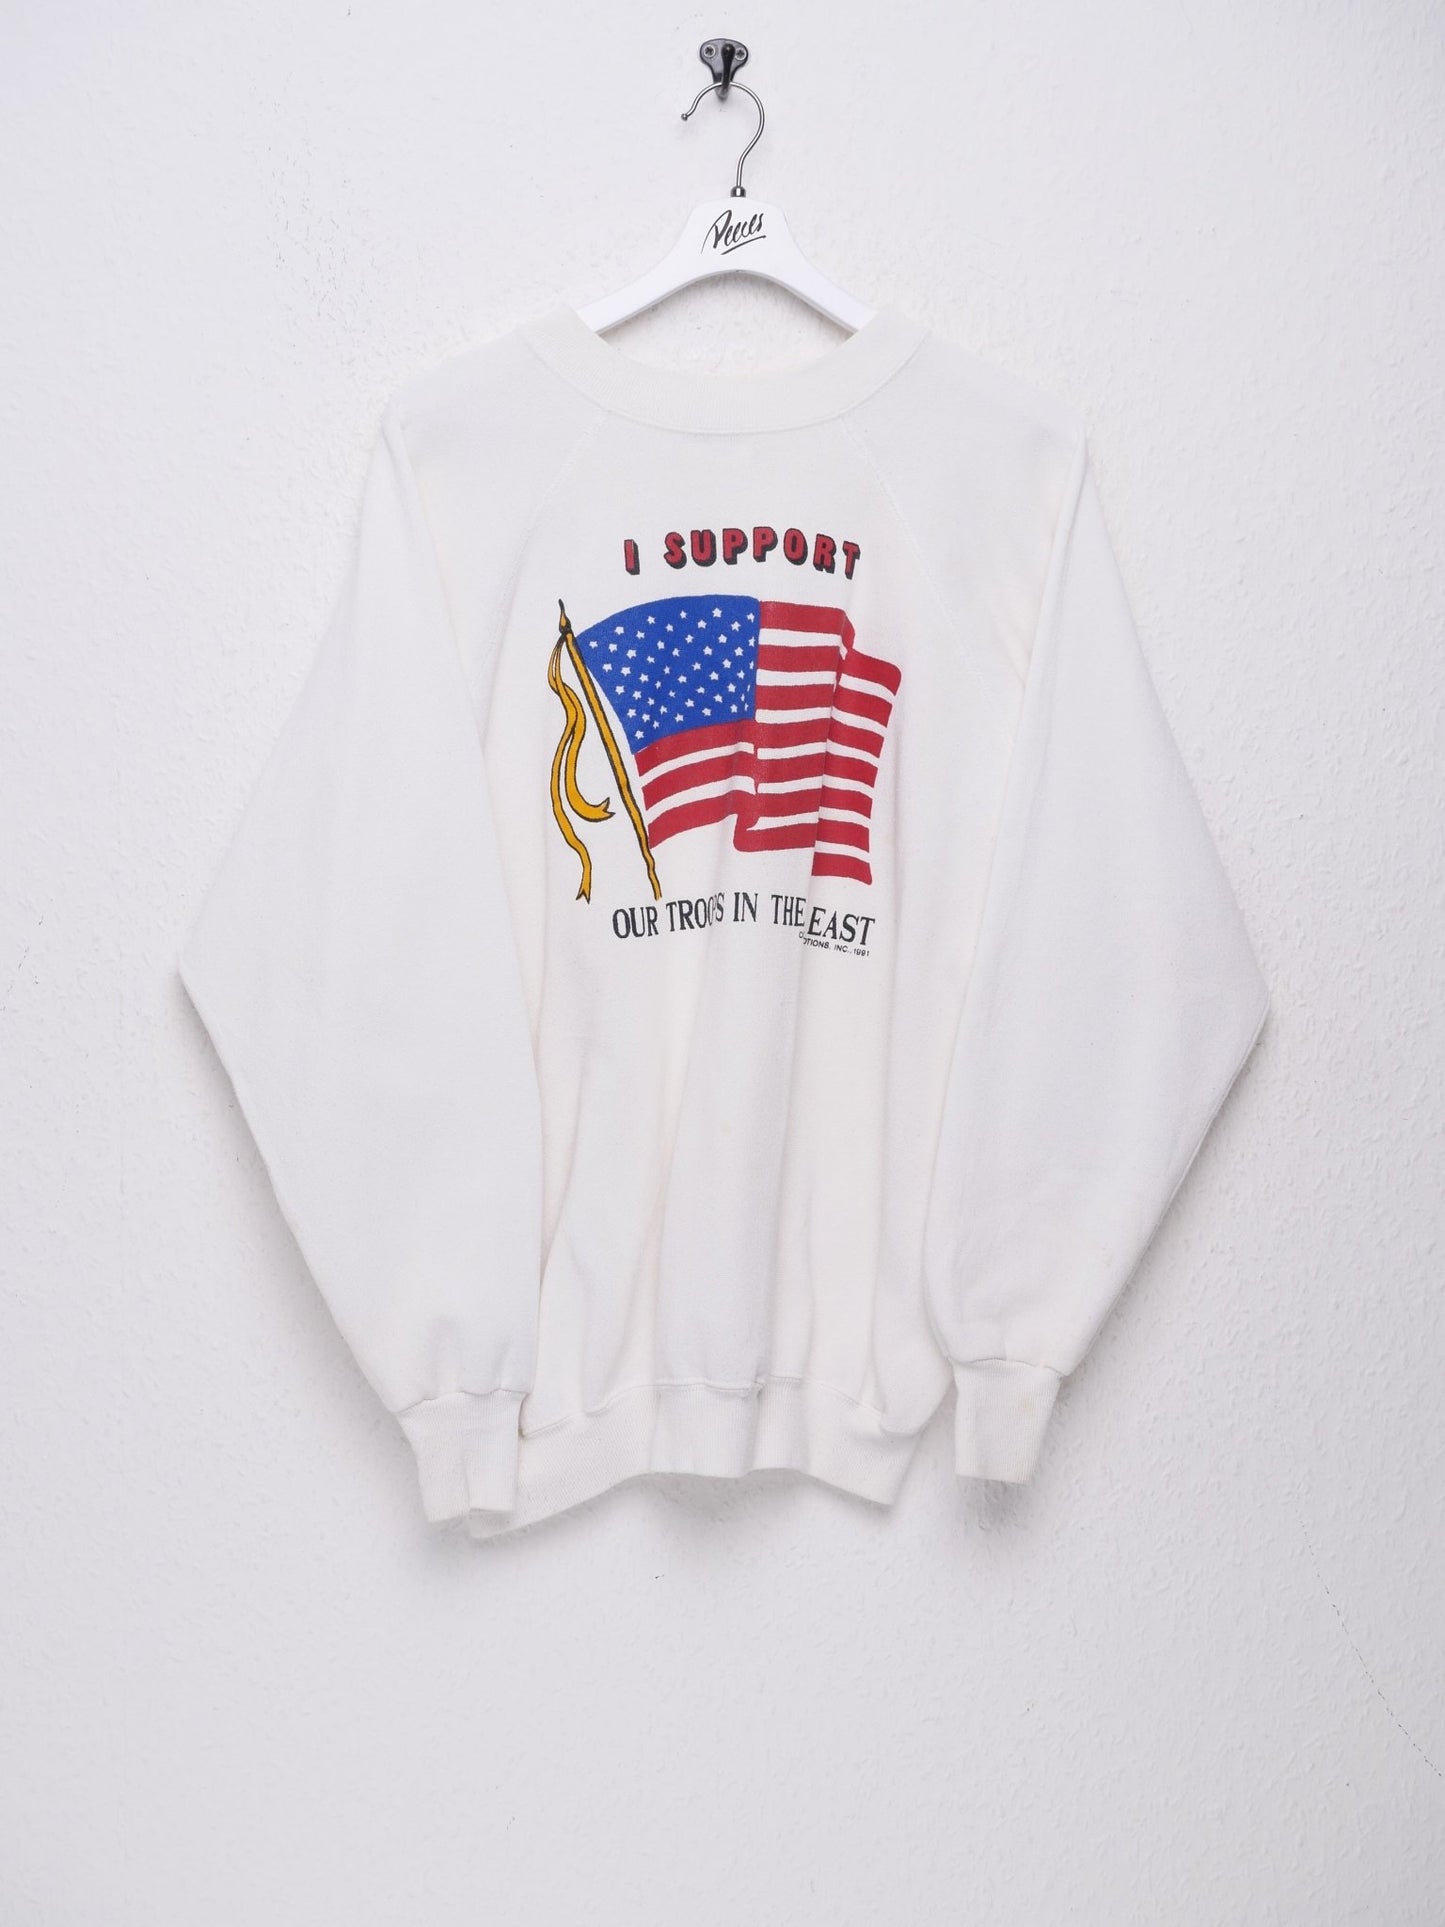 Printed 'I support America' white Sweater - Peeces